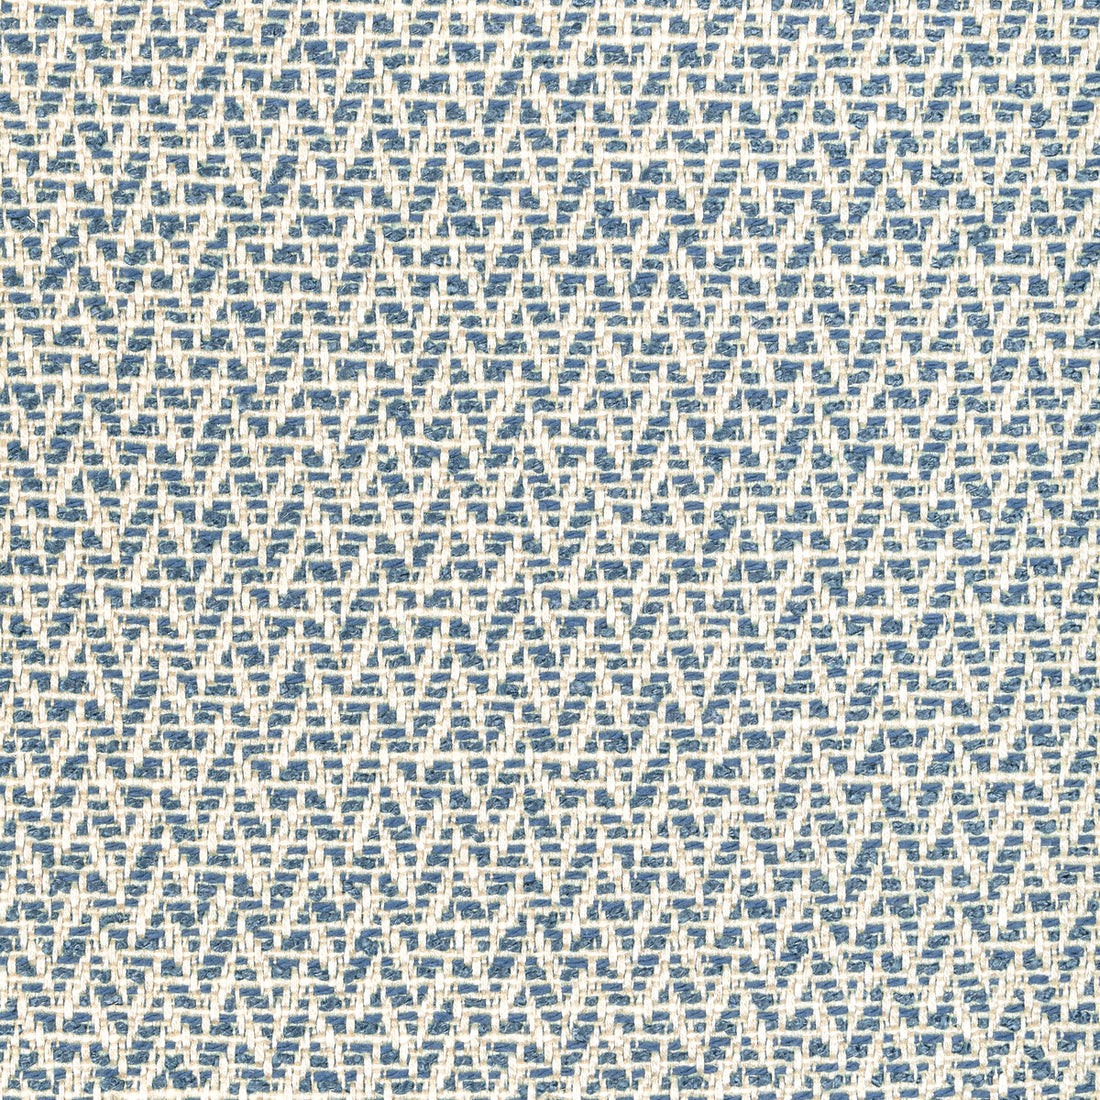 Kravet Design fabric in 36418-5 color - pattern 36418.5.0 - by Kravet Design in the Performance Crypton Home collection